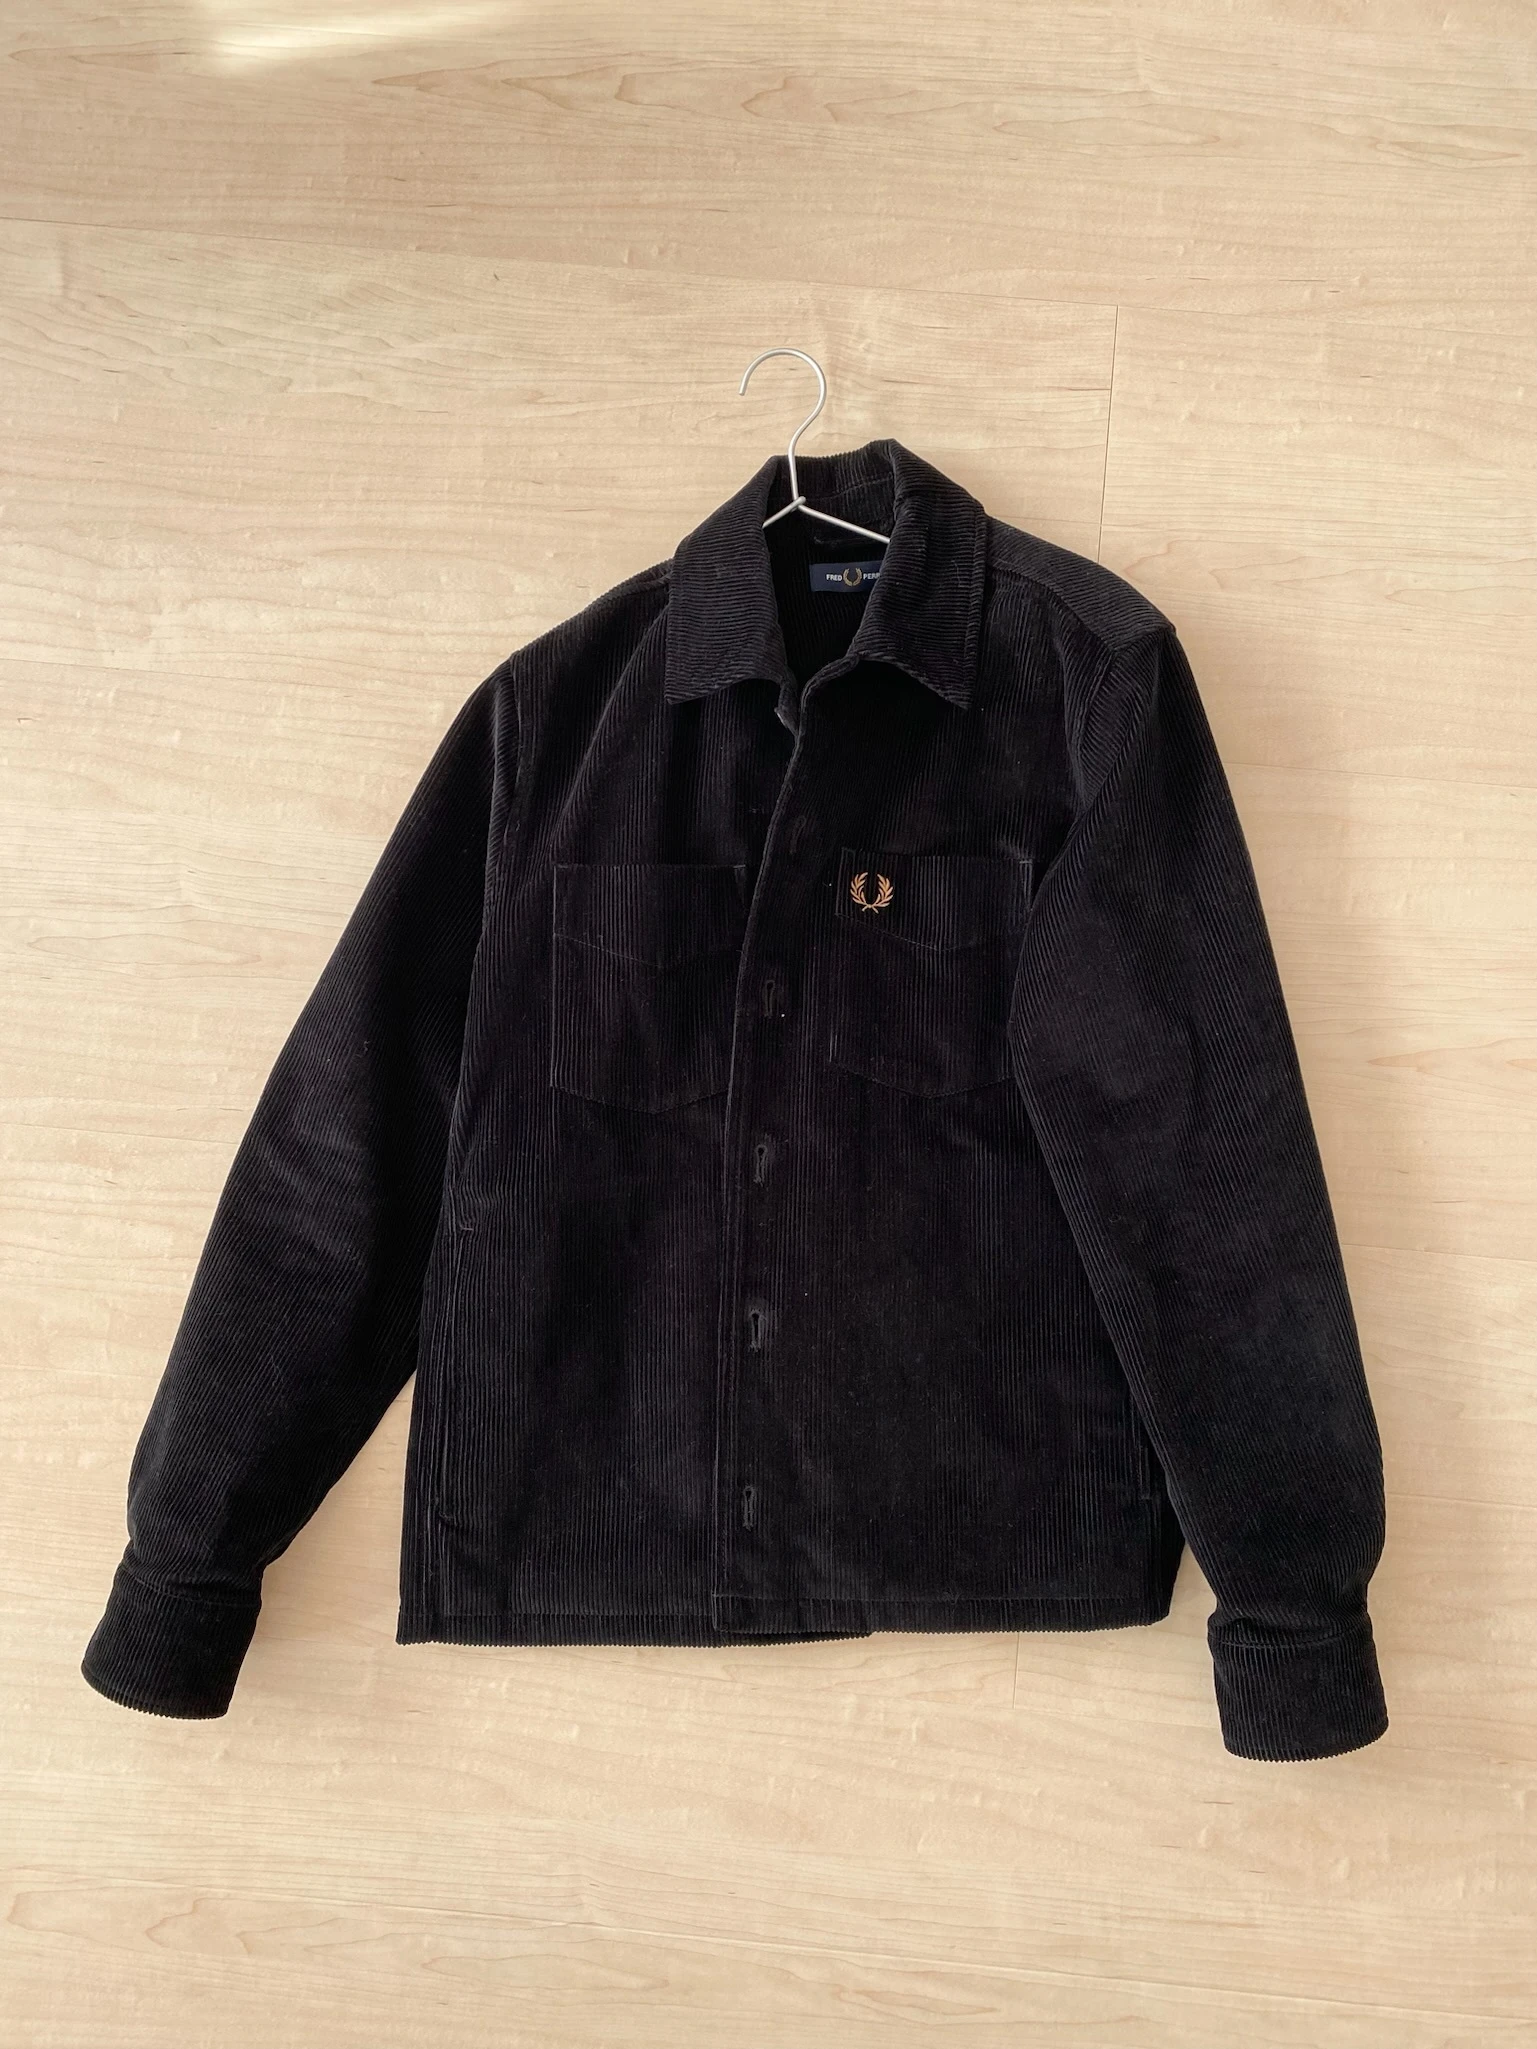 FRED PERRY　Cord Overshirt　オーバーシャツ　コーデュロイ